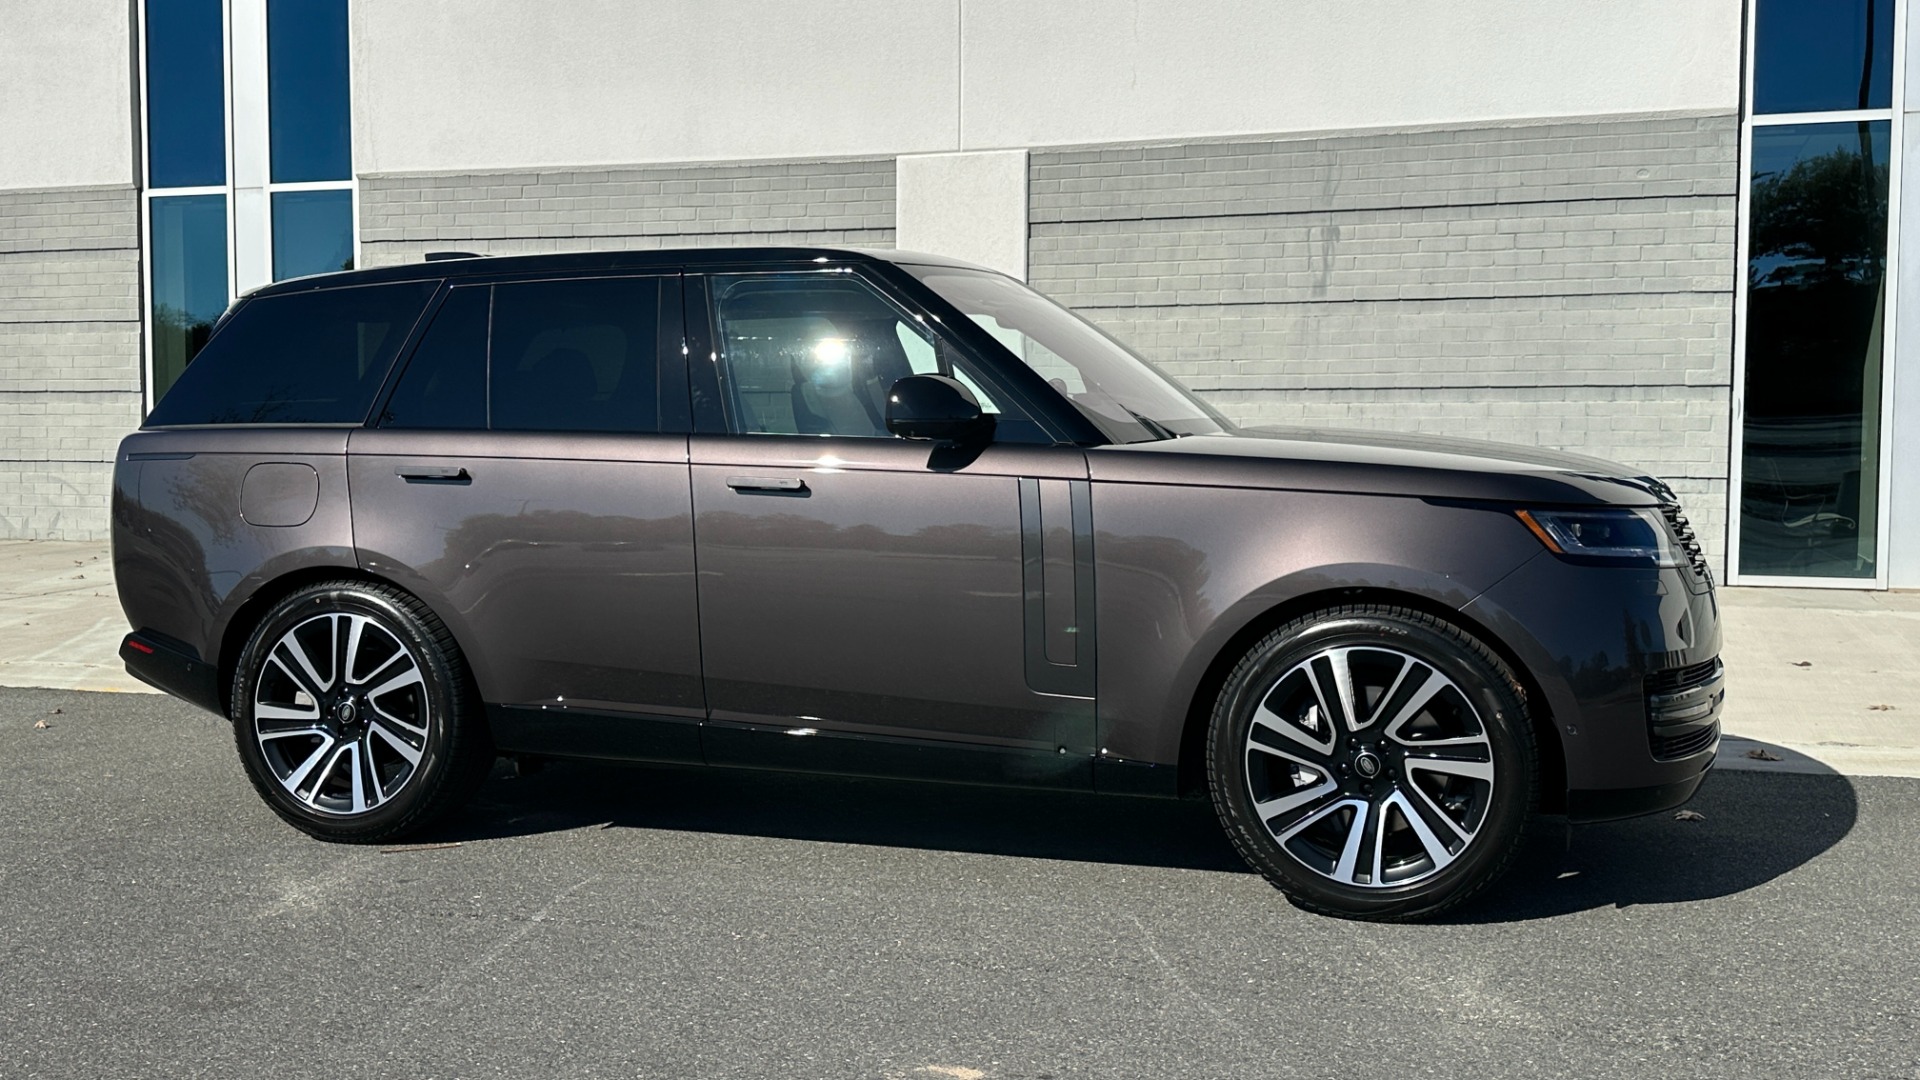 Used 2023 Land Rover Range Rover SE / 22IN DIAMOND WHEELS / SHADOW EXTERIOR / CHARENTE GREY / BLACK ROOF for sale $164,000 at Formula Imports in Charlotte NC 28227 3